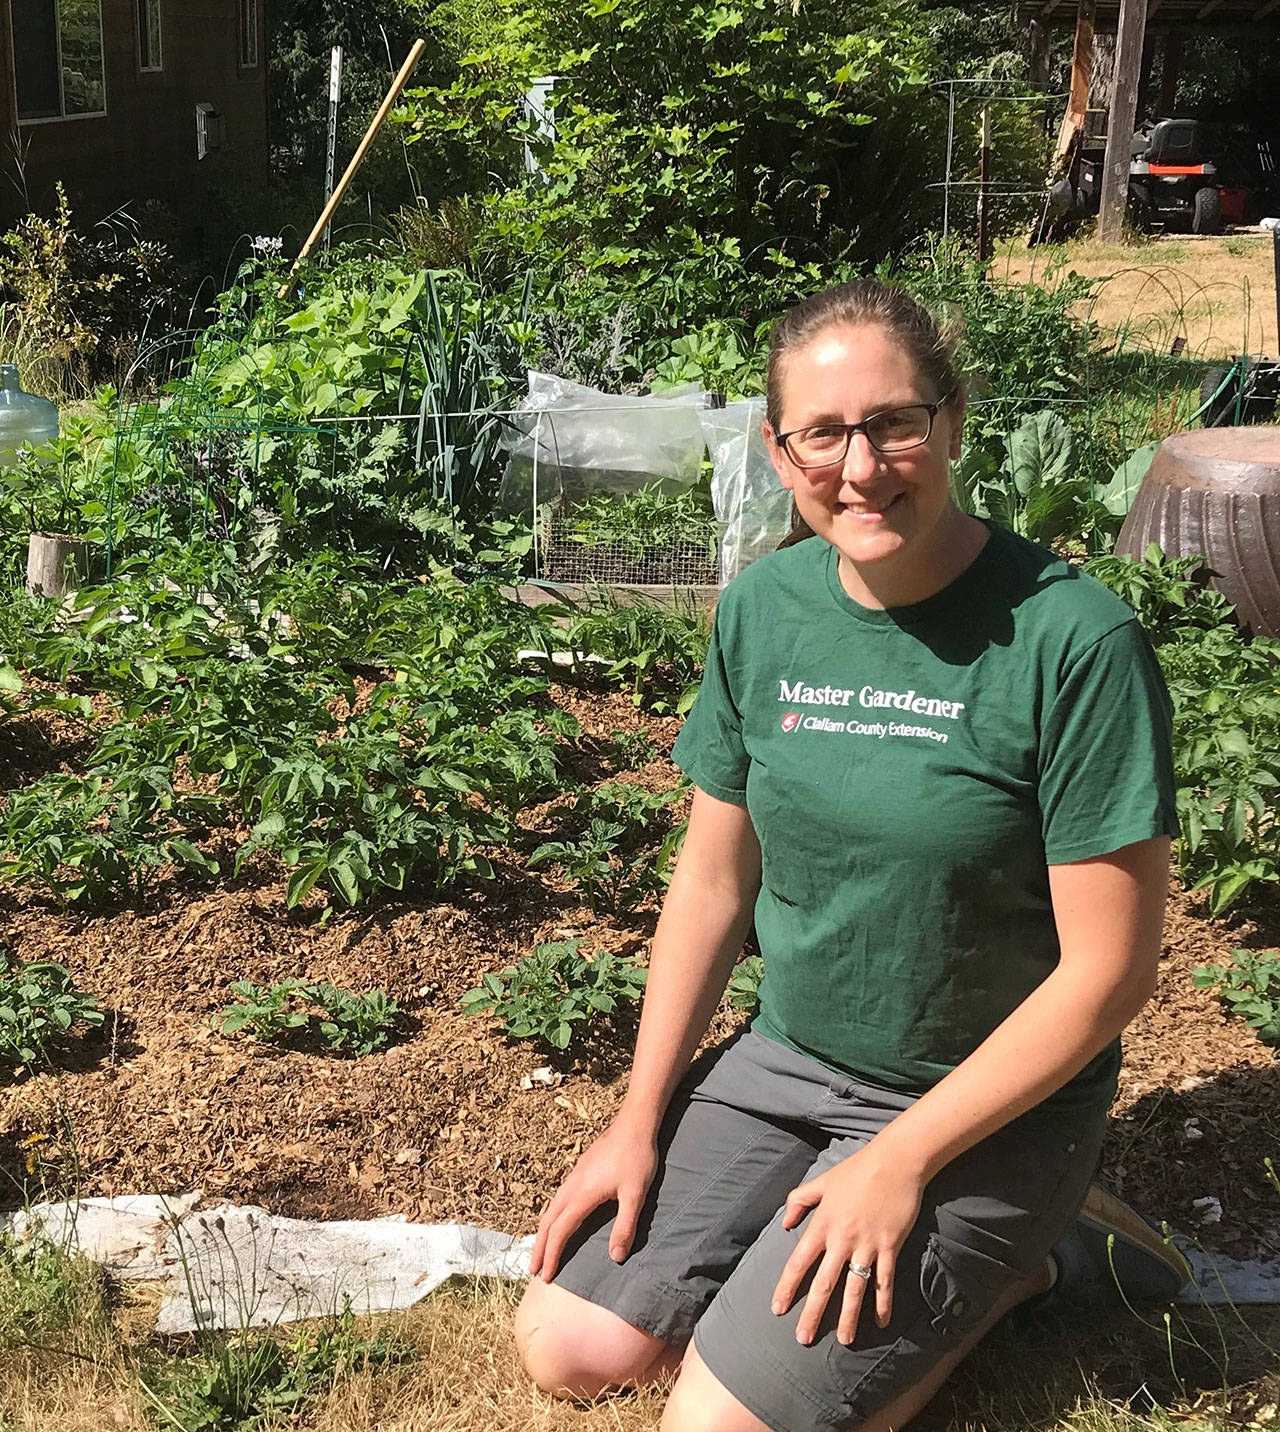 Laurel Moulton, WSU’s Clallam County Master Gardener program coordinator, will discuss spiders in her live stream Zoom presentation set for Oct. 22, part of the Green Thumbs Garden Tips education series. Submitted photo